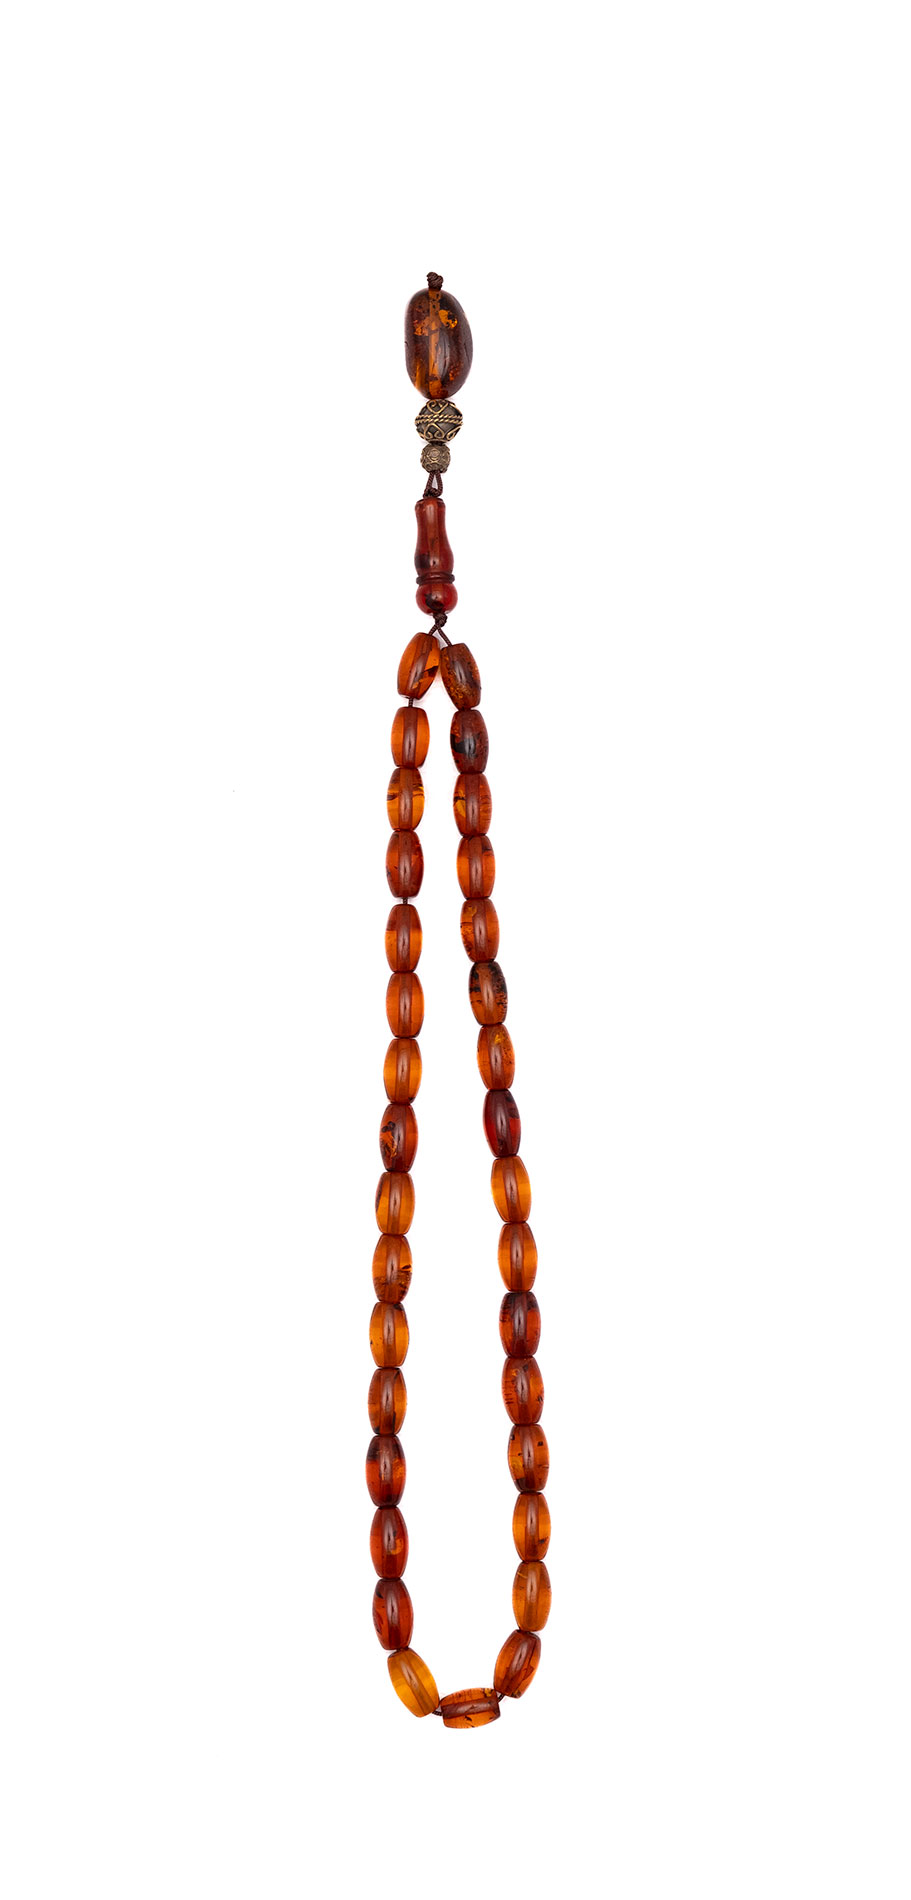 Muslim Prayer beads  made of genuine amber from Baltic sea - cut by hand